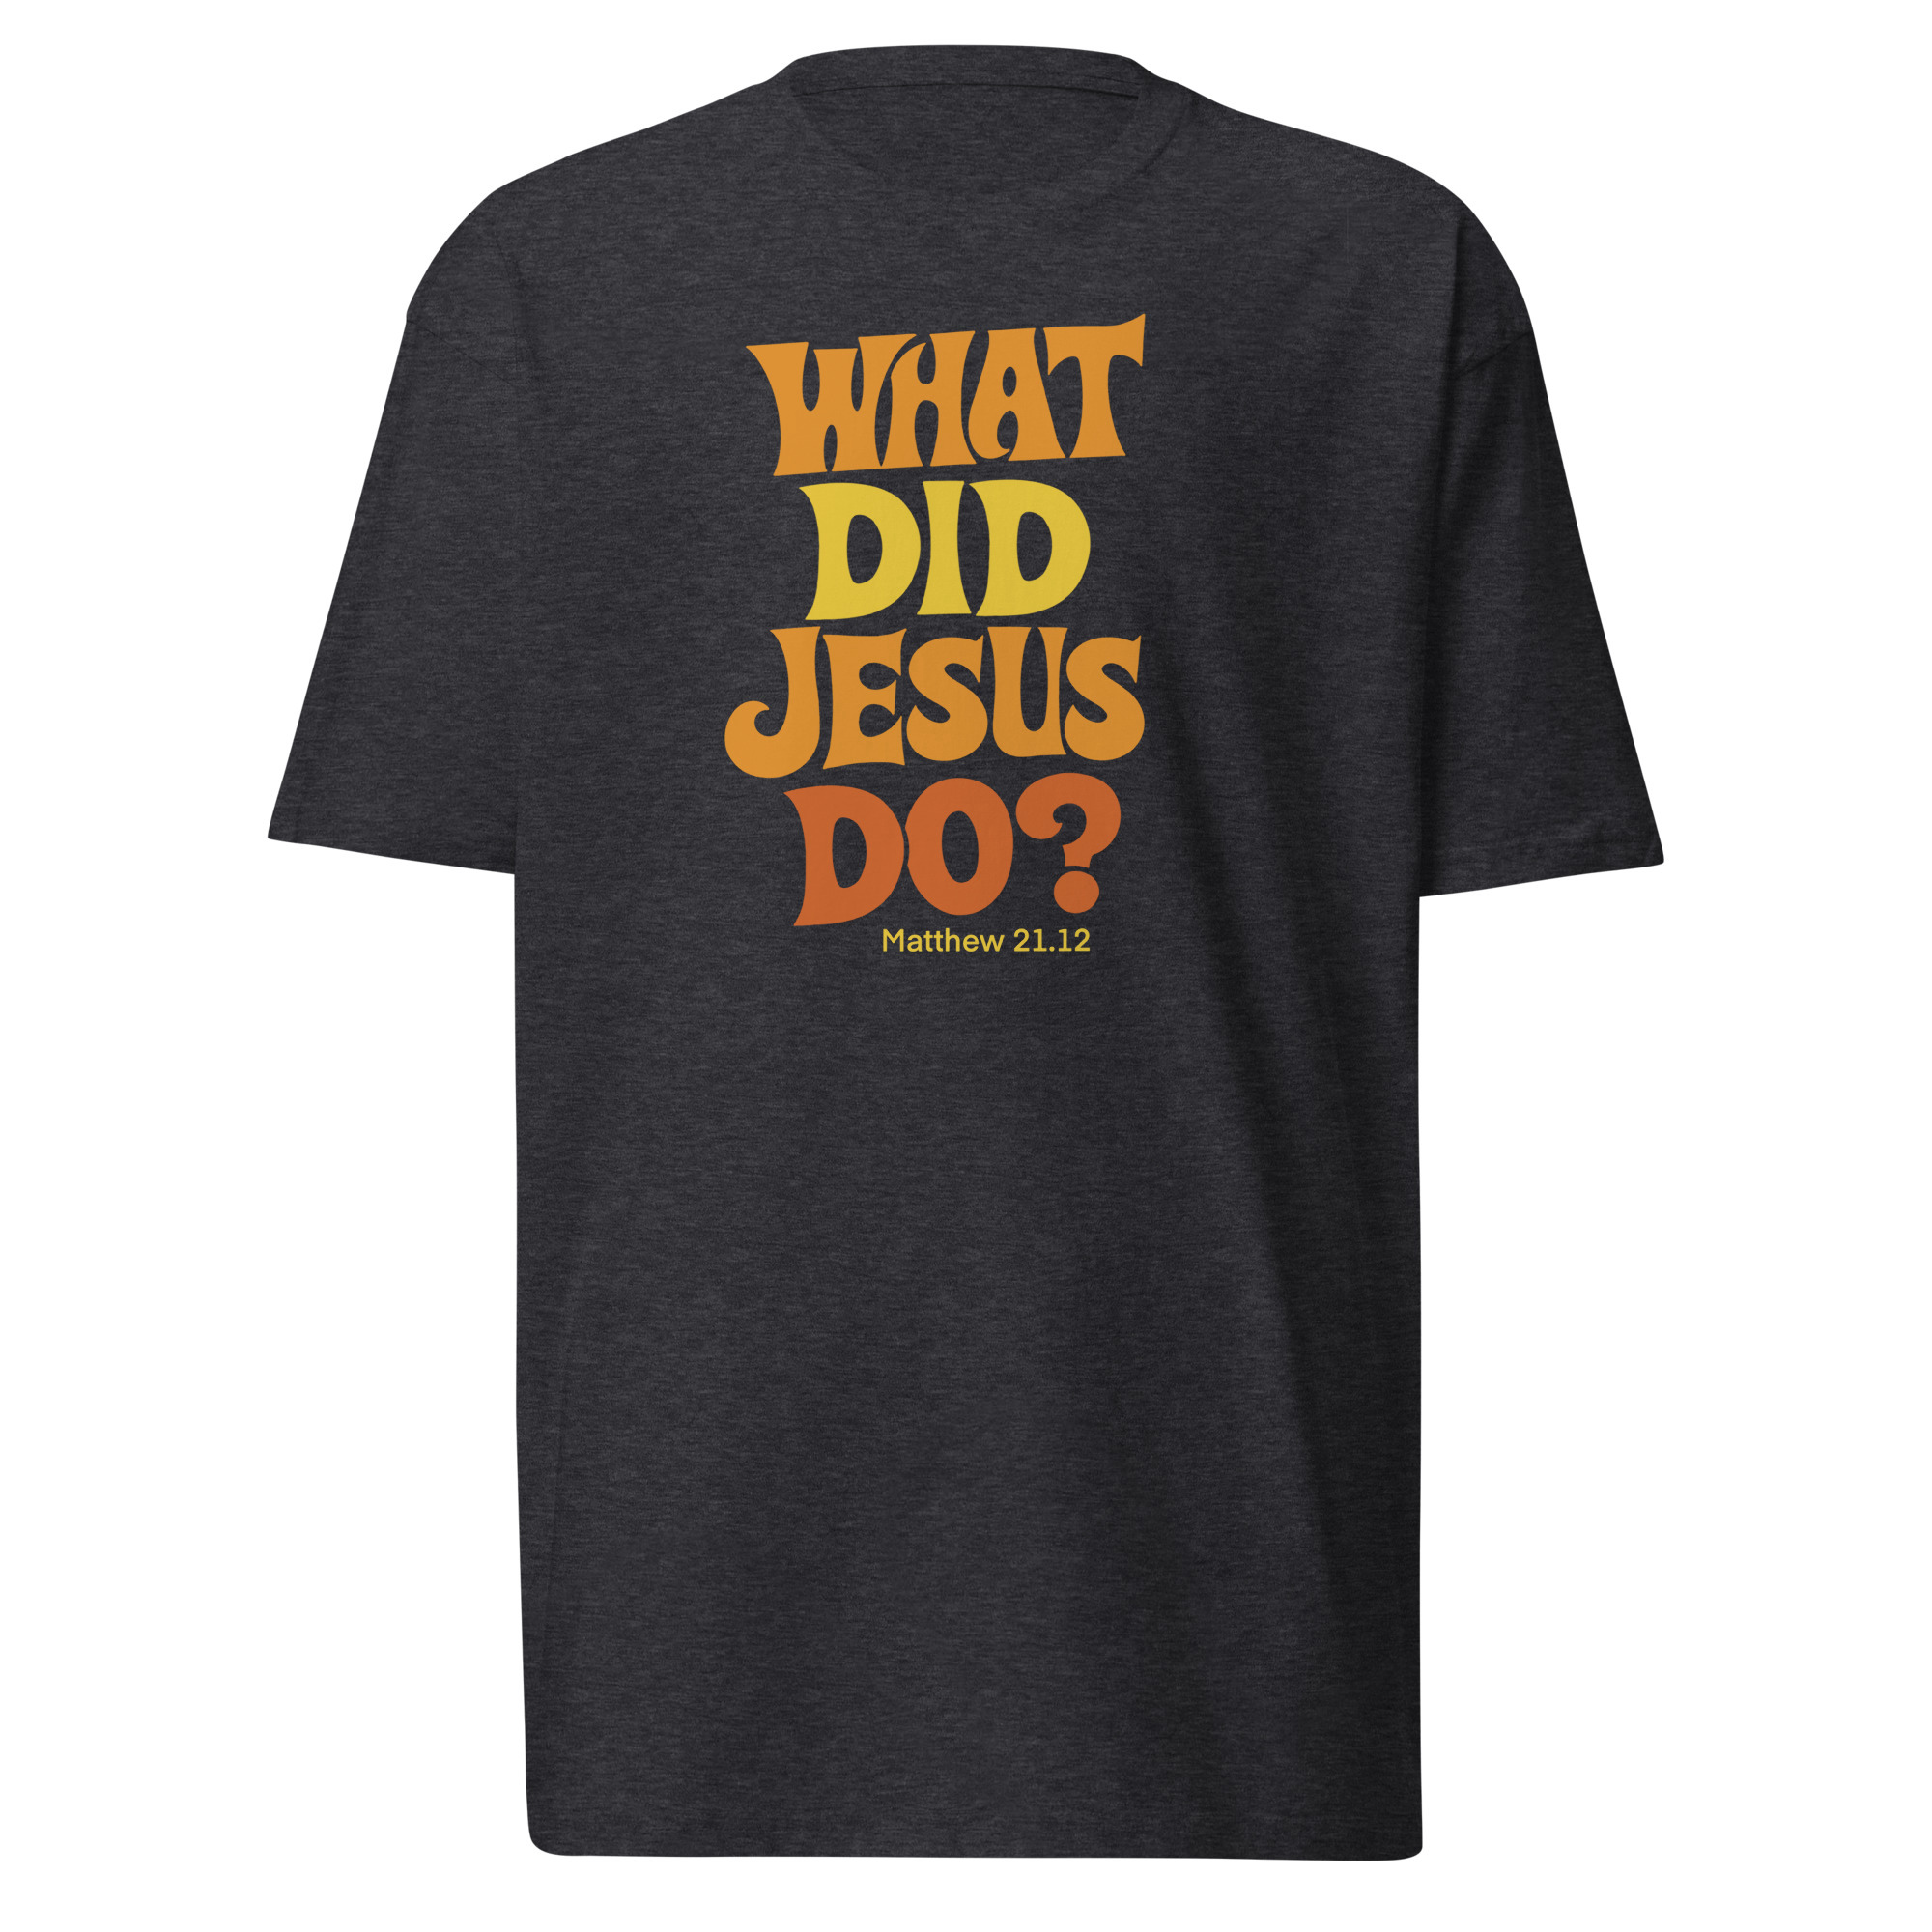 What Did Jesus Do? T-Shirt - Charcoal Heather / S